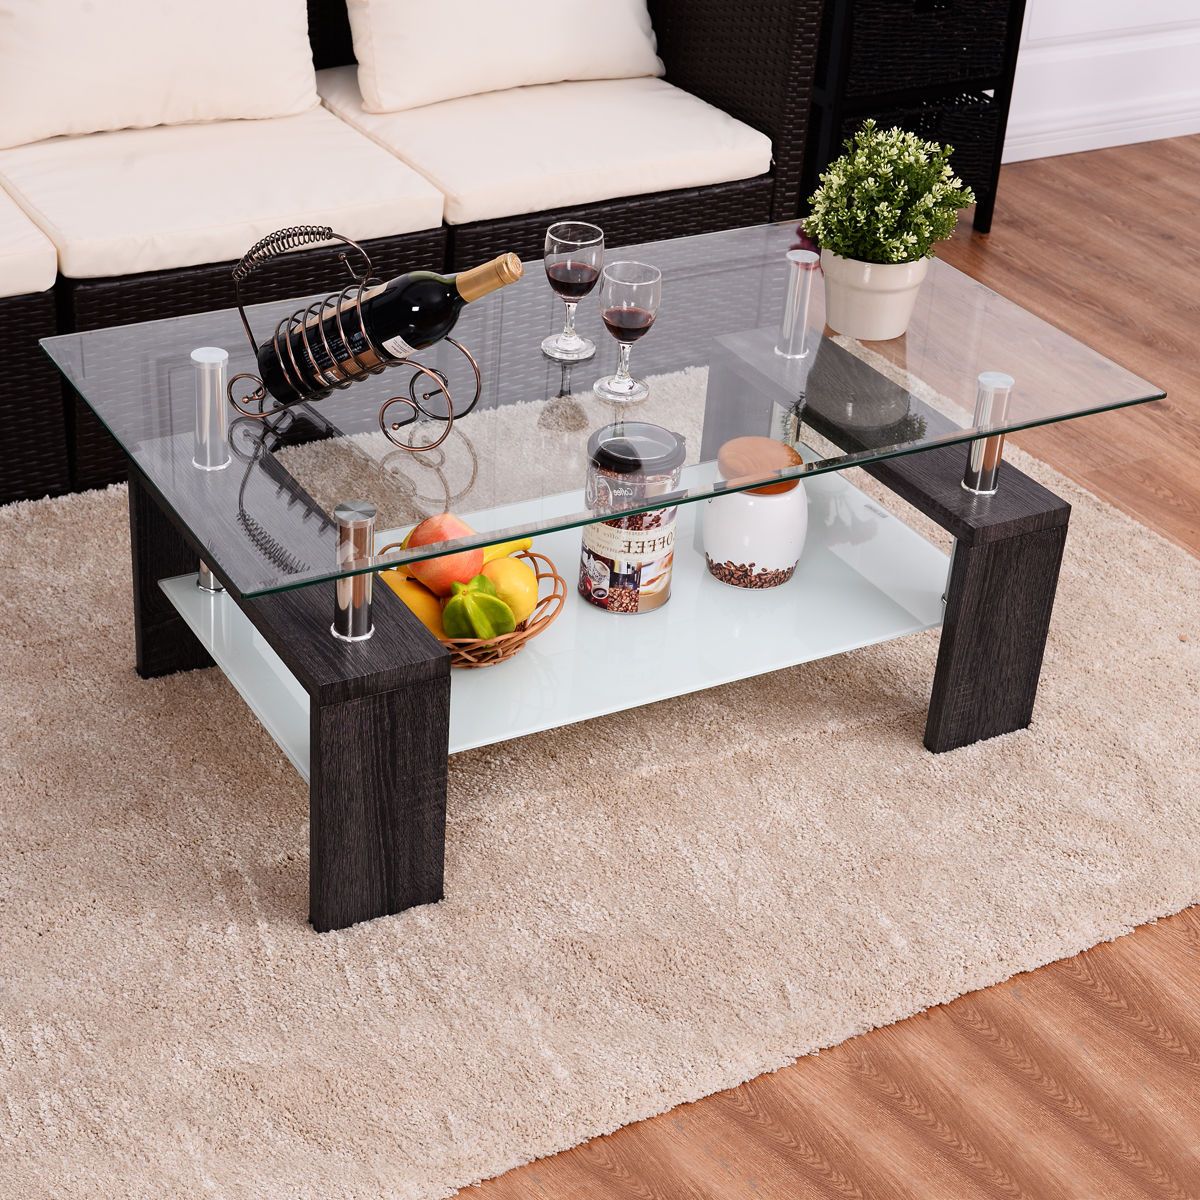 Giantex Rectangular Home Tempered Glass Coffee Table With Pertaining To Well Liked Rectangular Glass Top Coffee Tables (View 3 of 20)